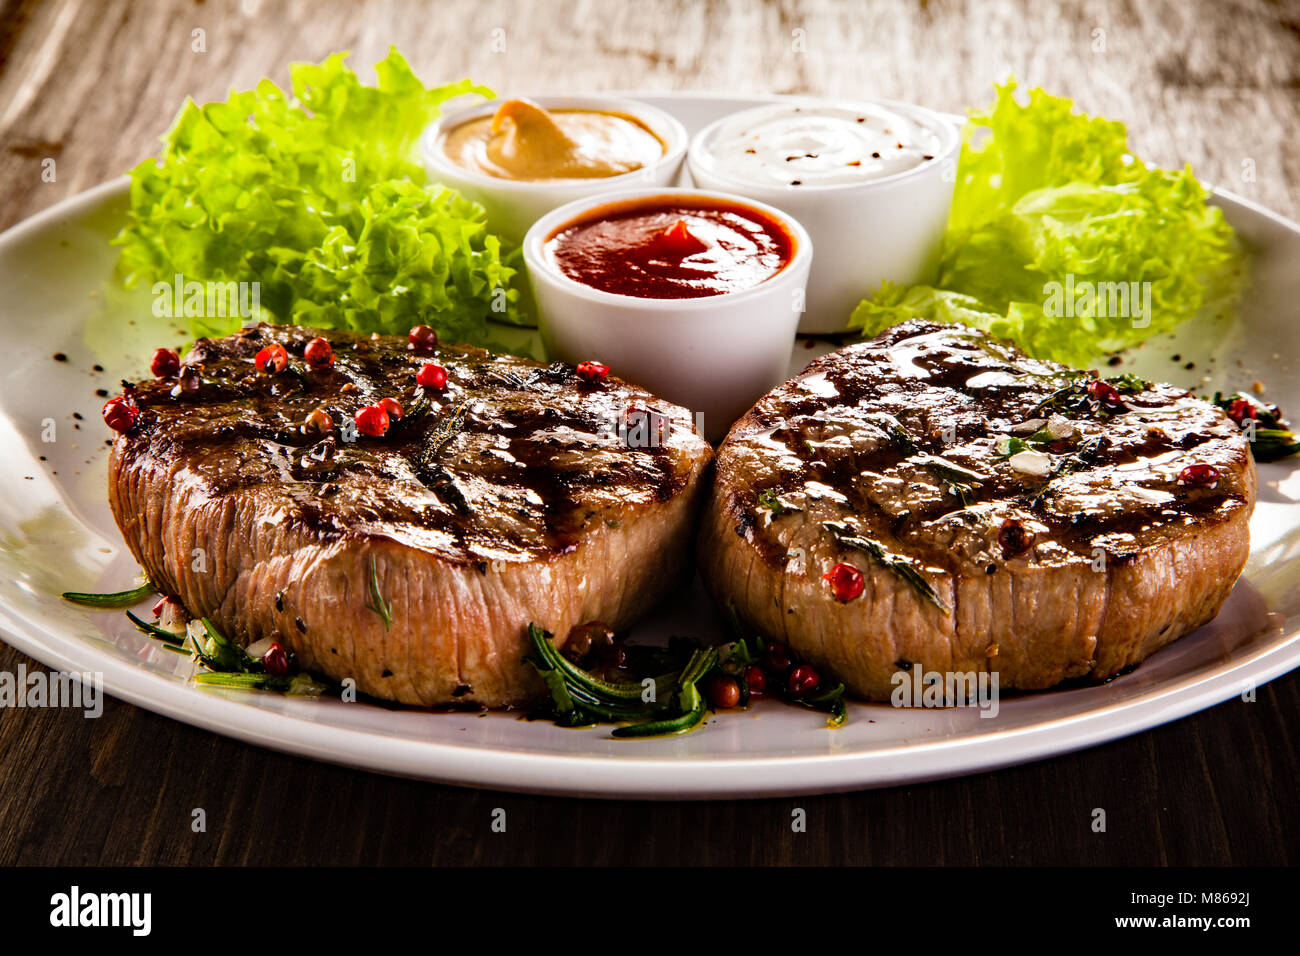 Grilled beefsteaks and vegetables  on wooden table Stock Photo